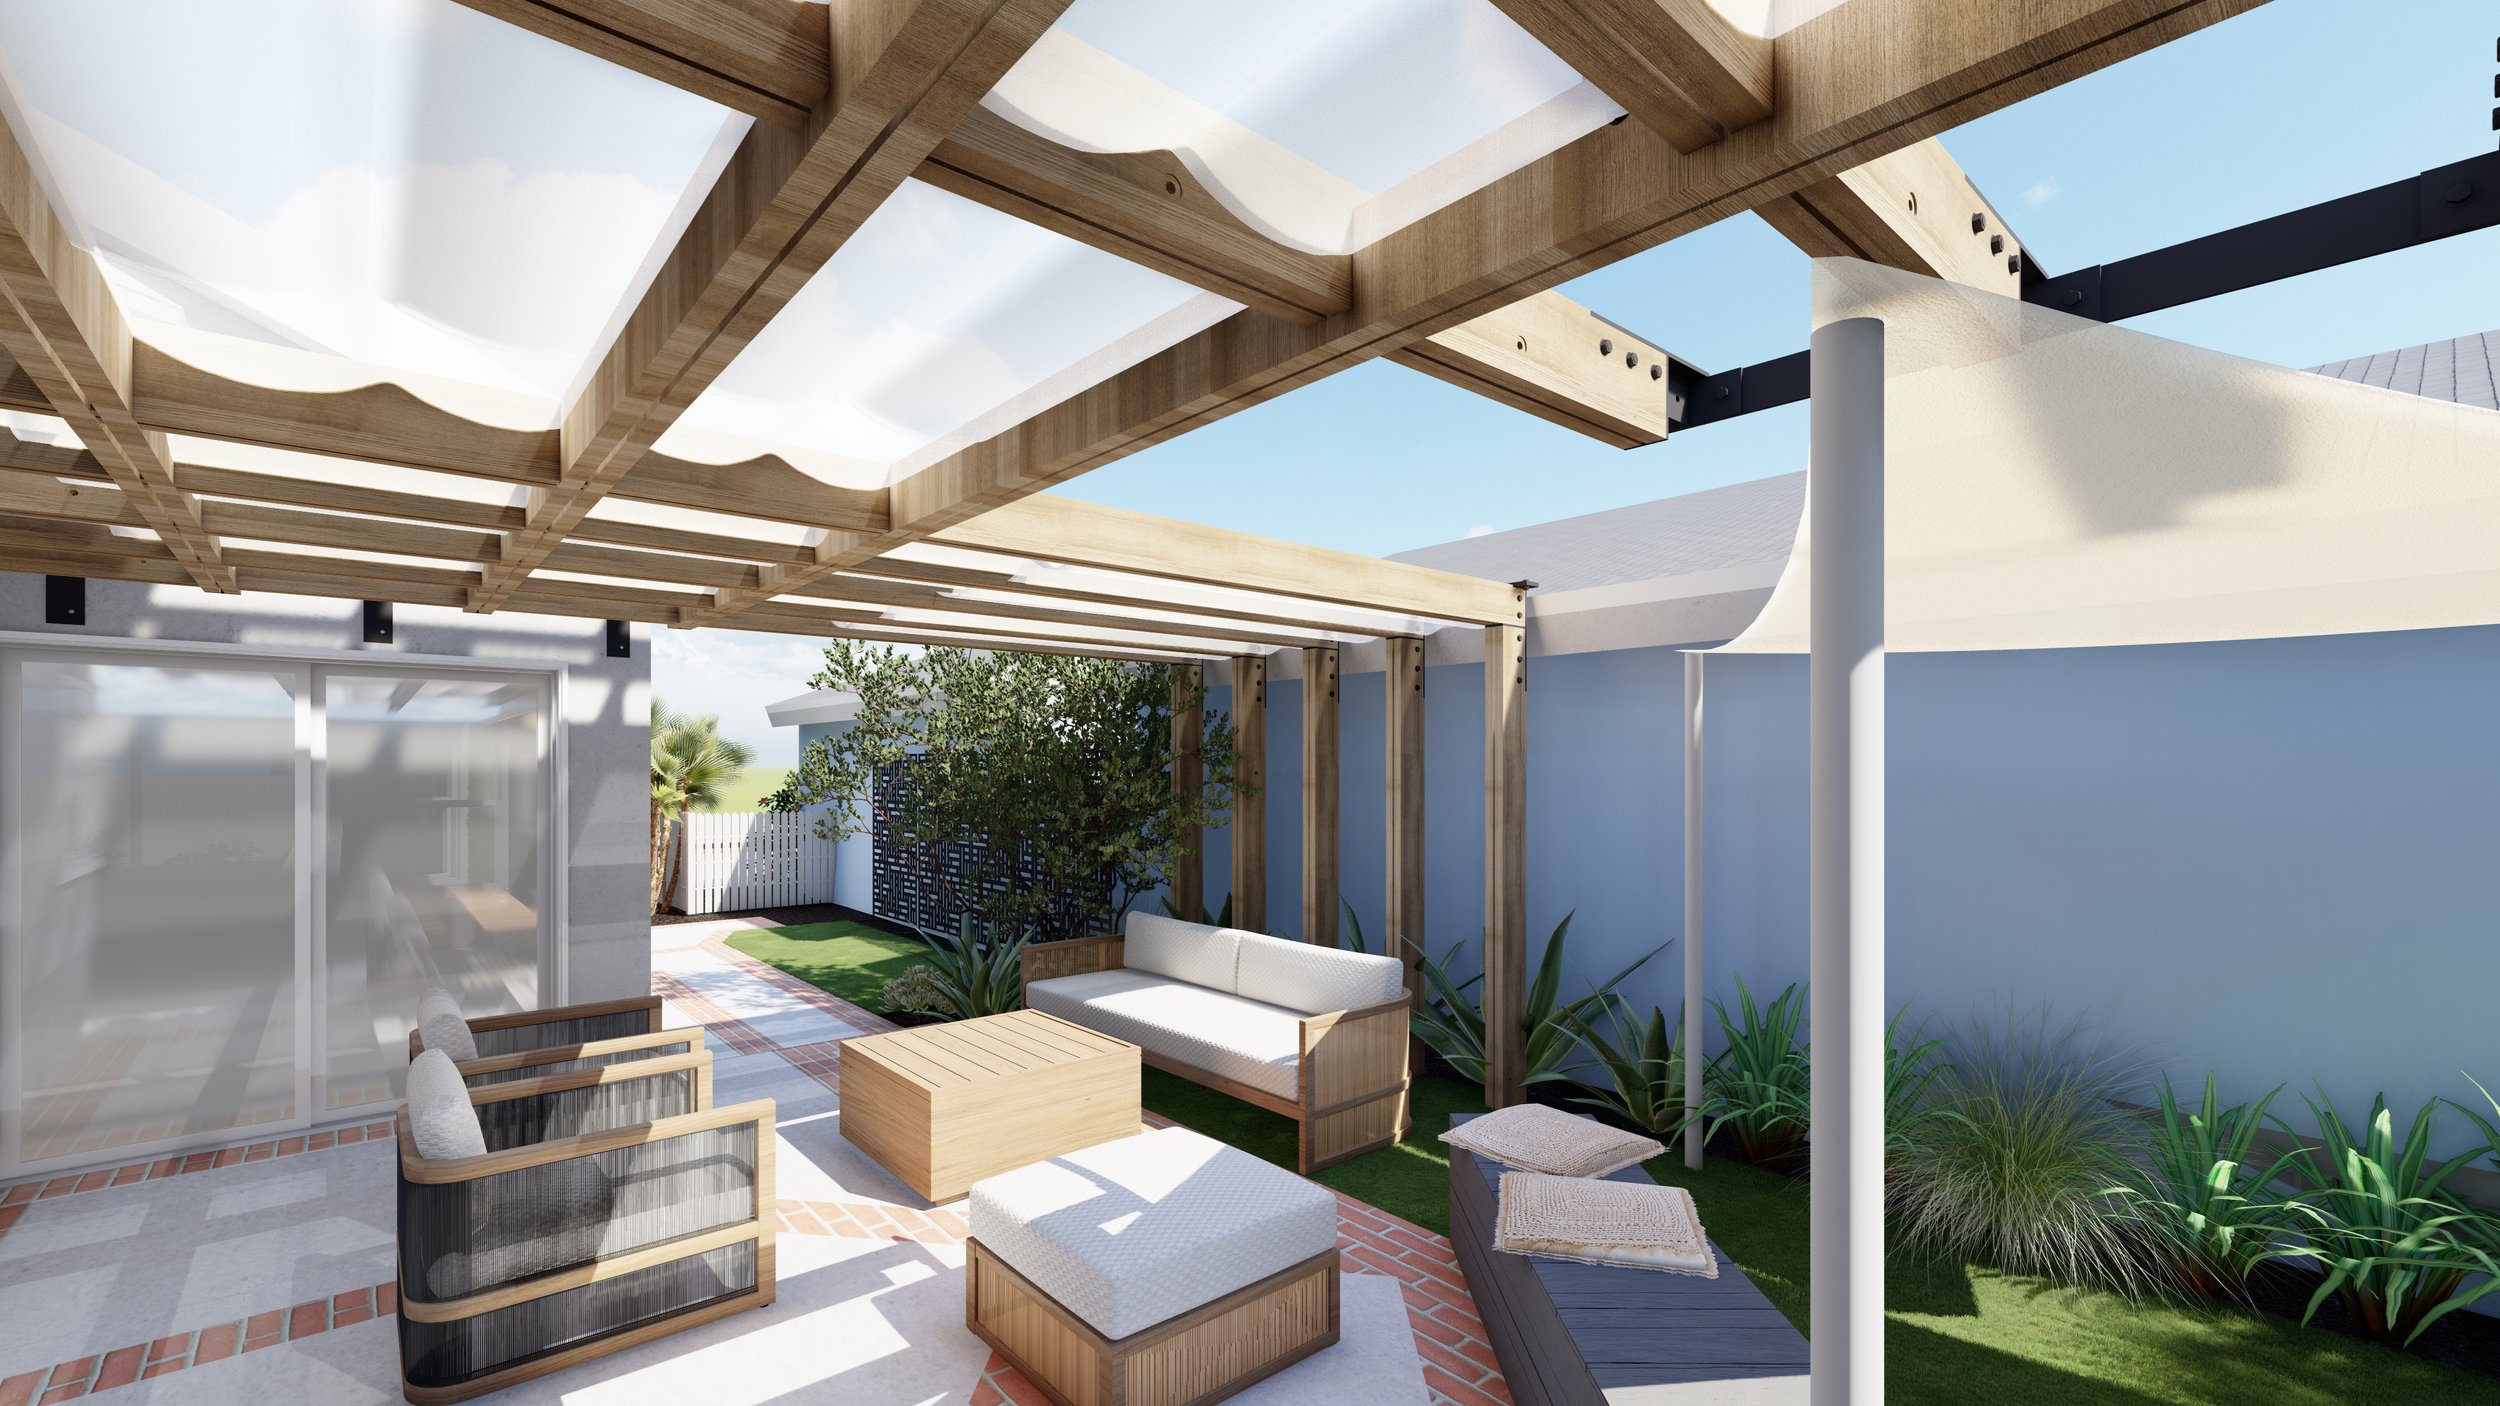 Side yard design with Capri outdoor living room set and breezy overhead pergola and shade sail.